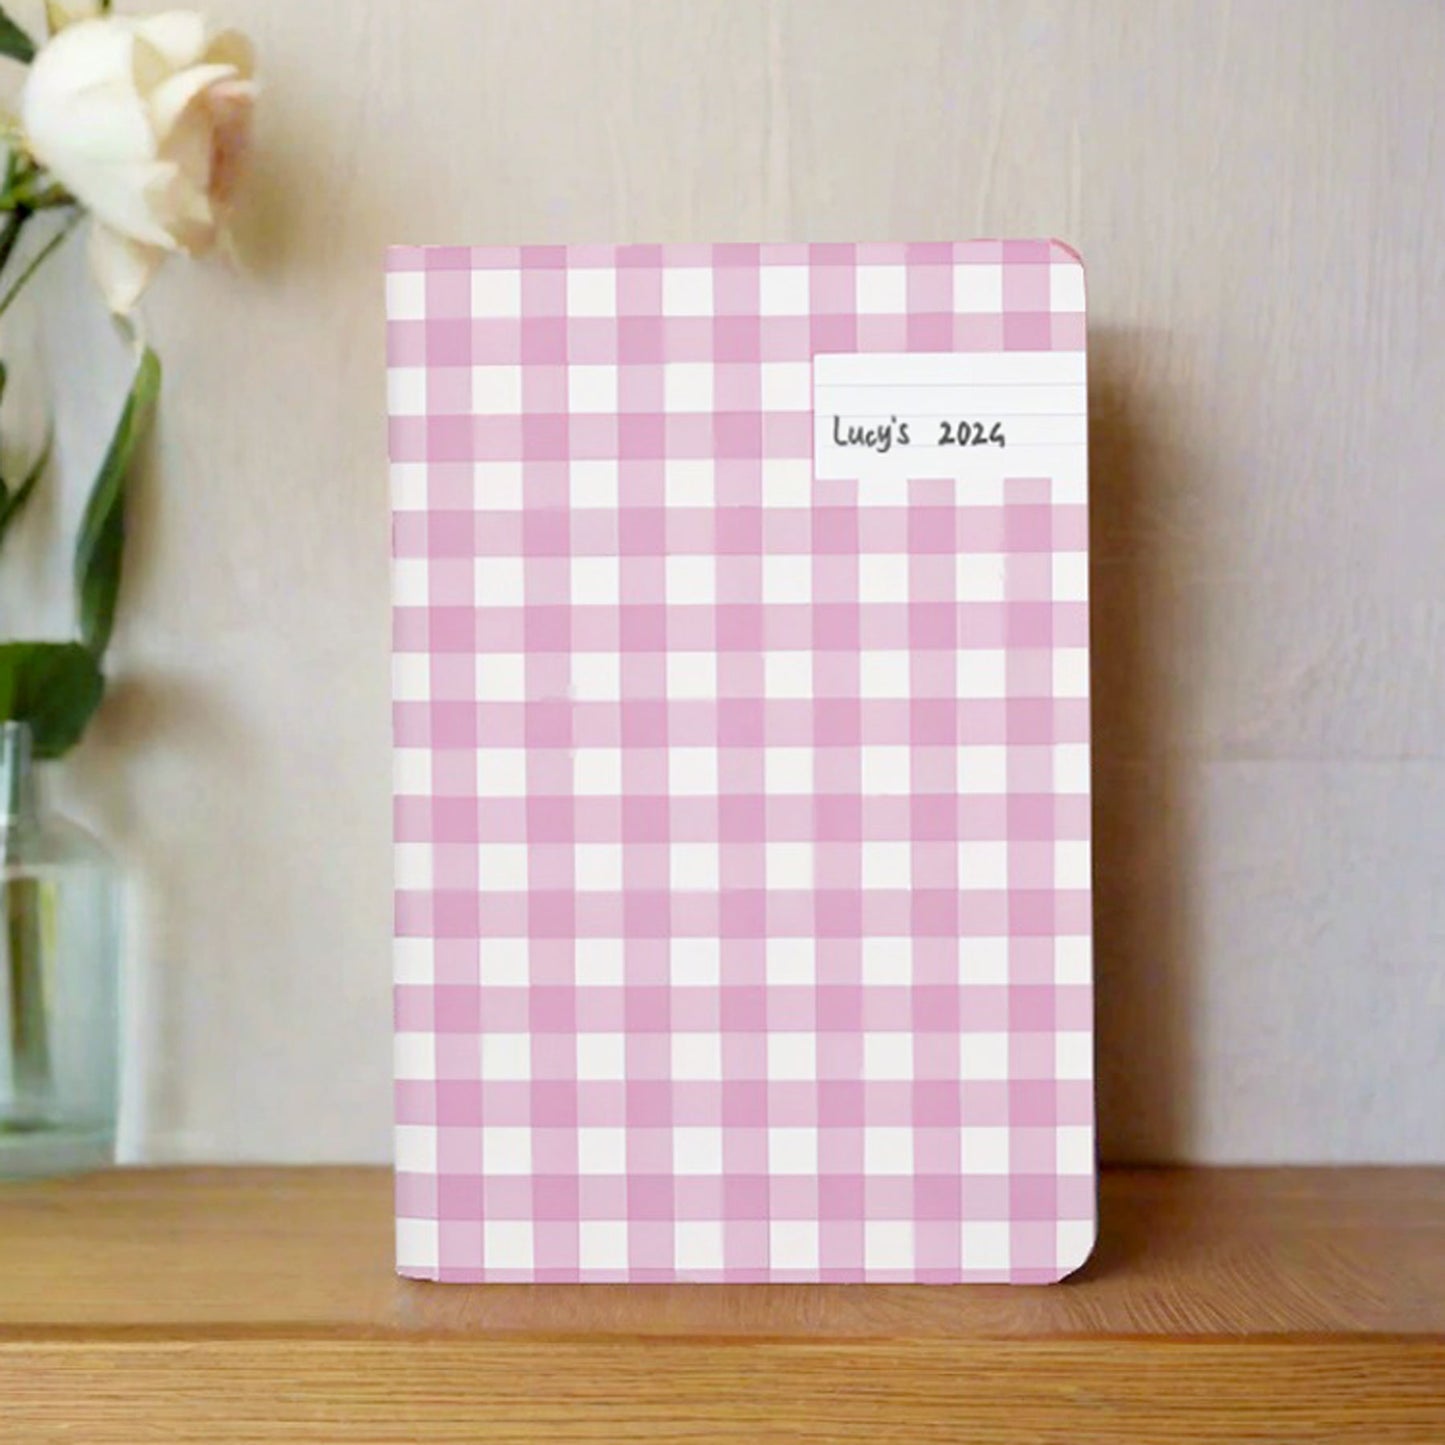 Swinging Candy Pink Notebook - Ruled